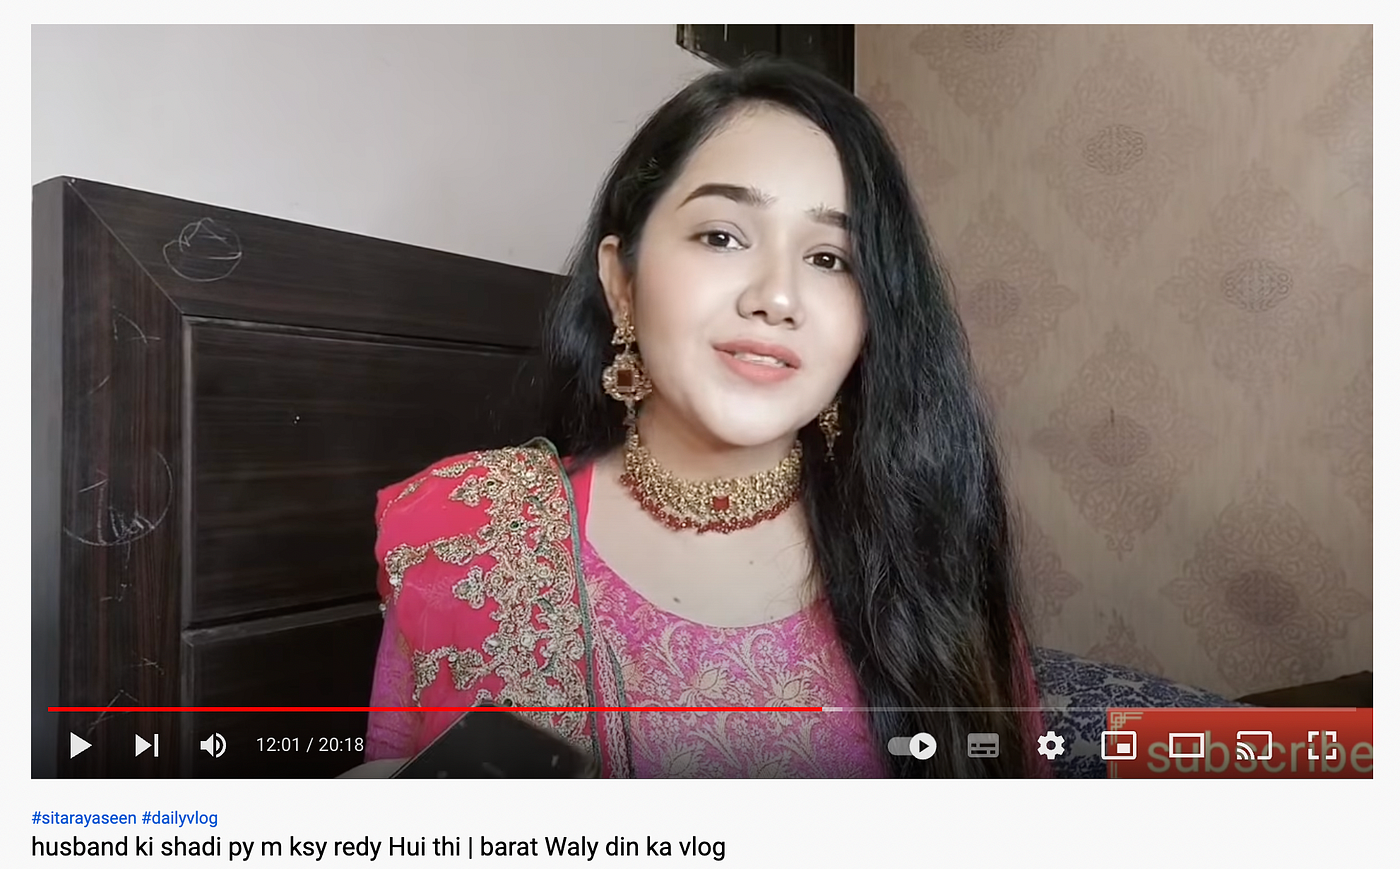 This woman vlogged about her life in a polygamous relationship, and now she has 900k subscribers! by Mehek Kapoor Stories From Heart Medium